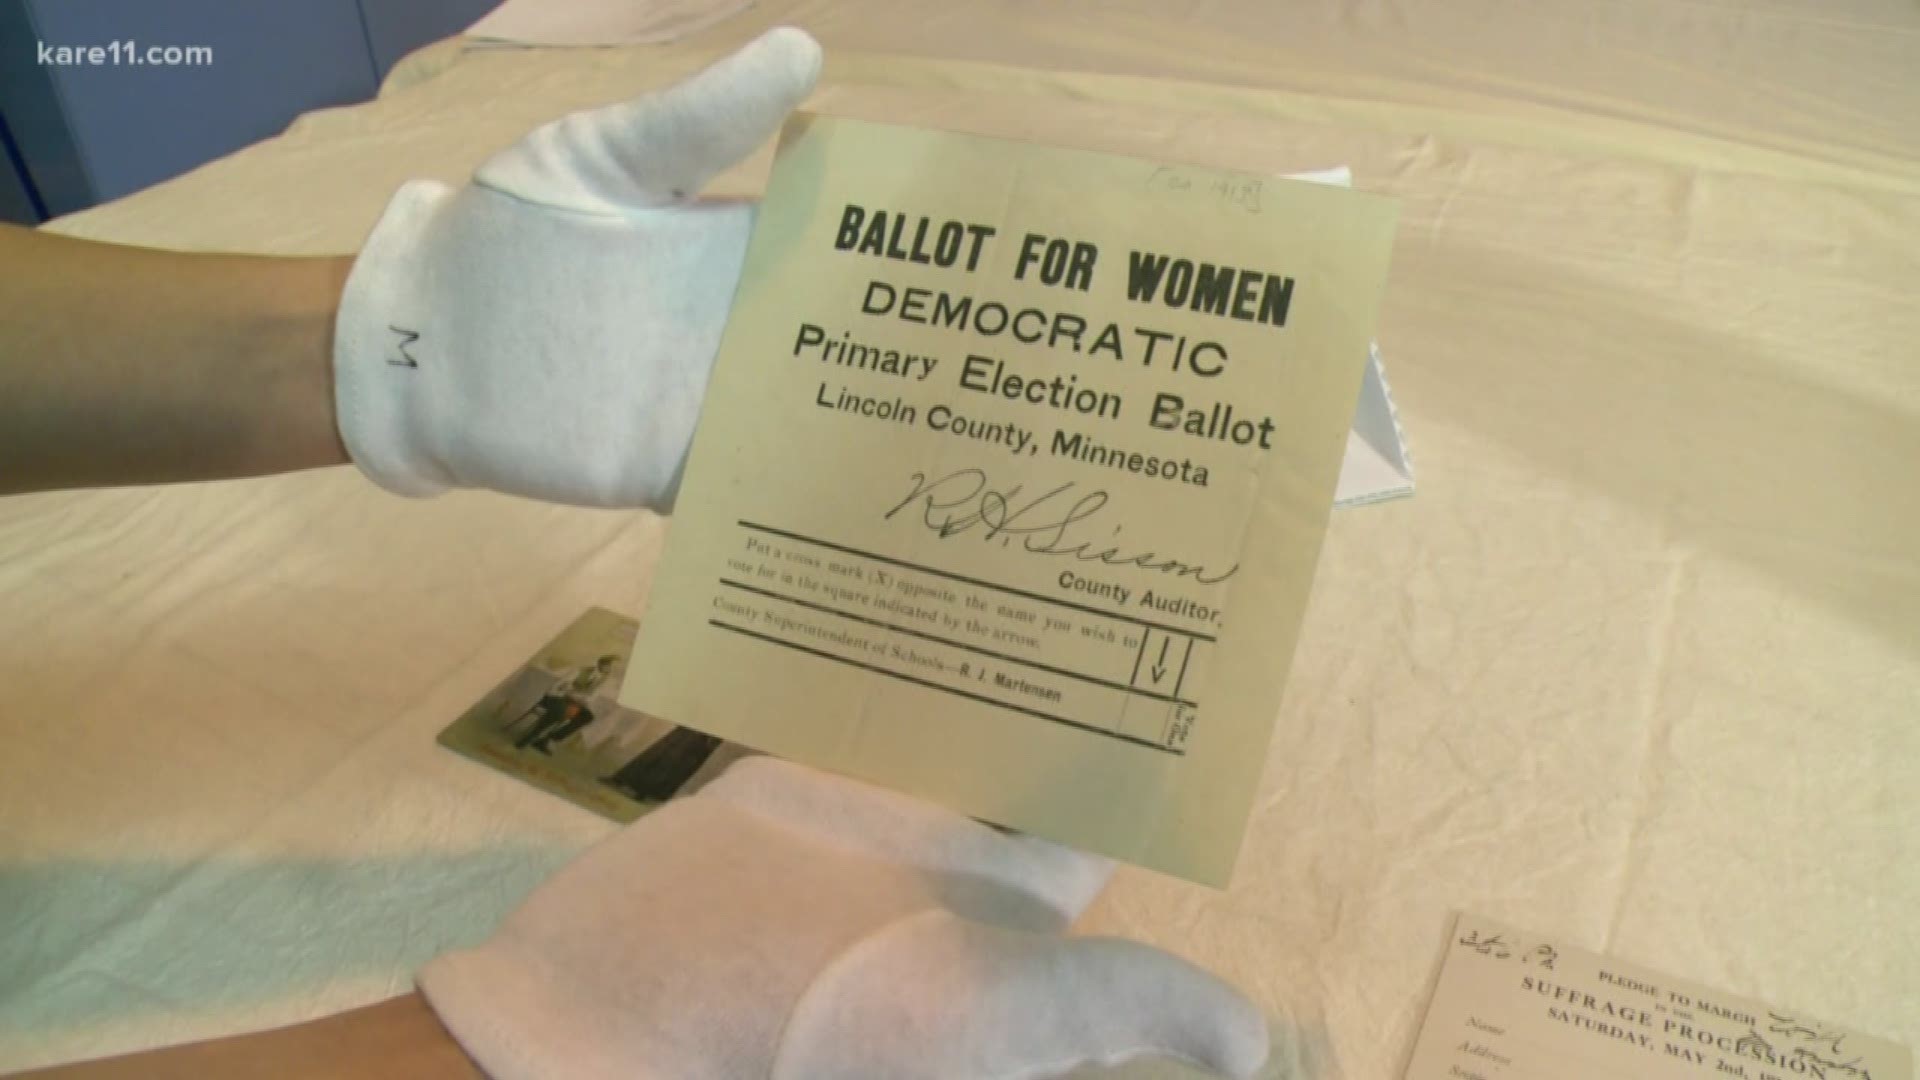 It's been nearly 100 years since women were first granted the right to vote in the U.S. Many Minnesota suffragists played a role in the passing of the 19th Amendment. https://kare11.tv/2Osima8